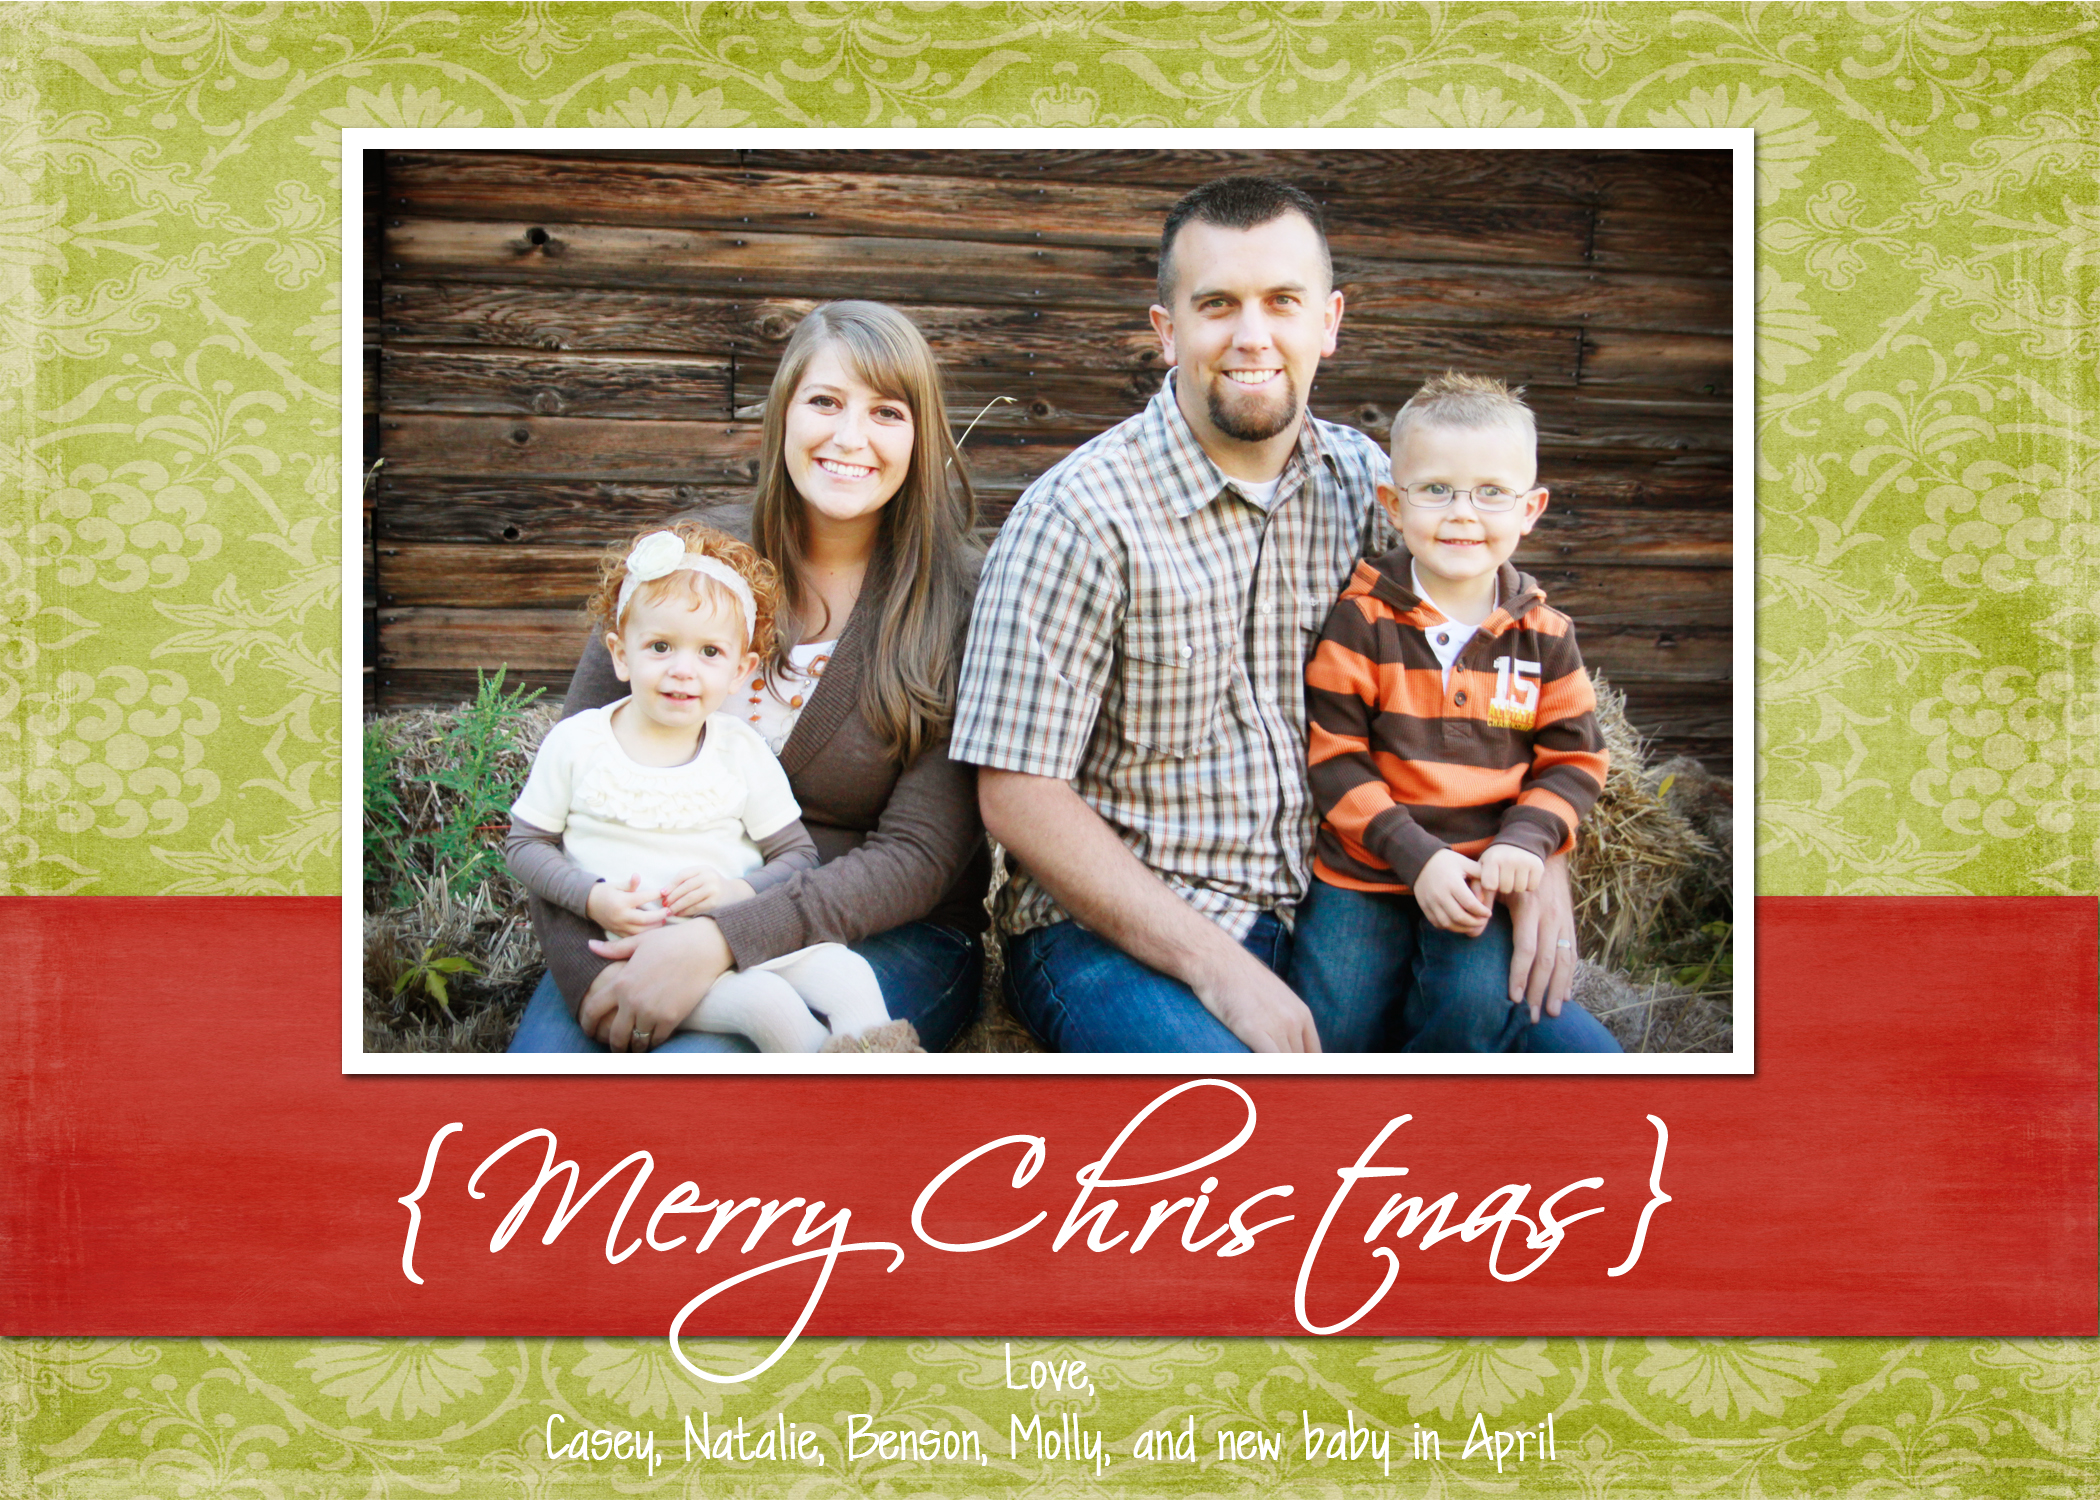 Christmas Card Templates Free Download - The Creative Mom In Free Christmas Card Templates For Photographers